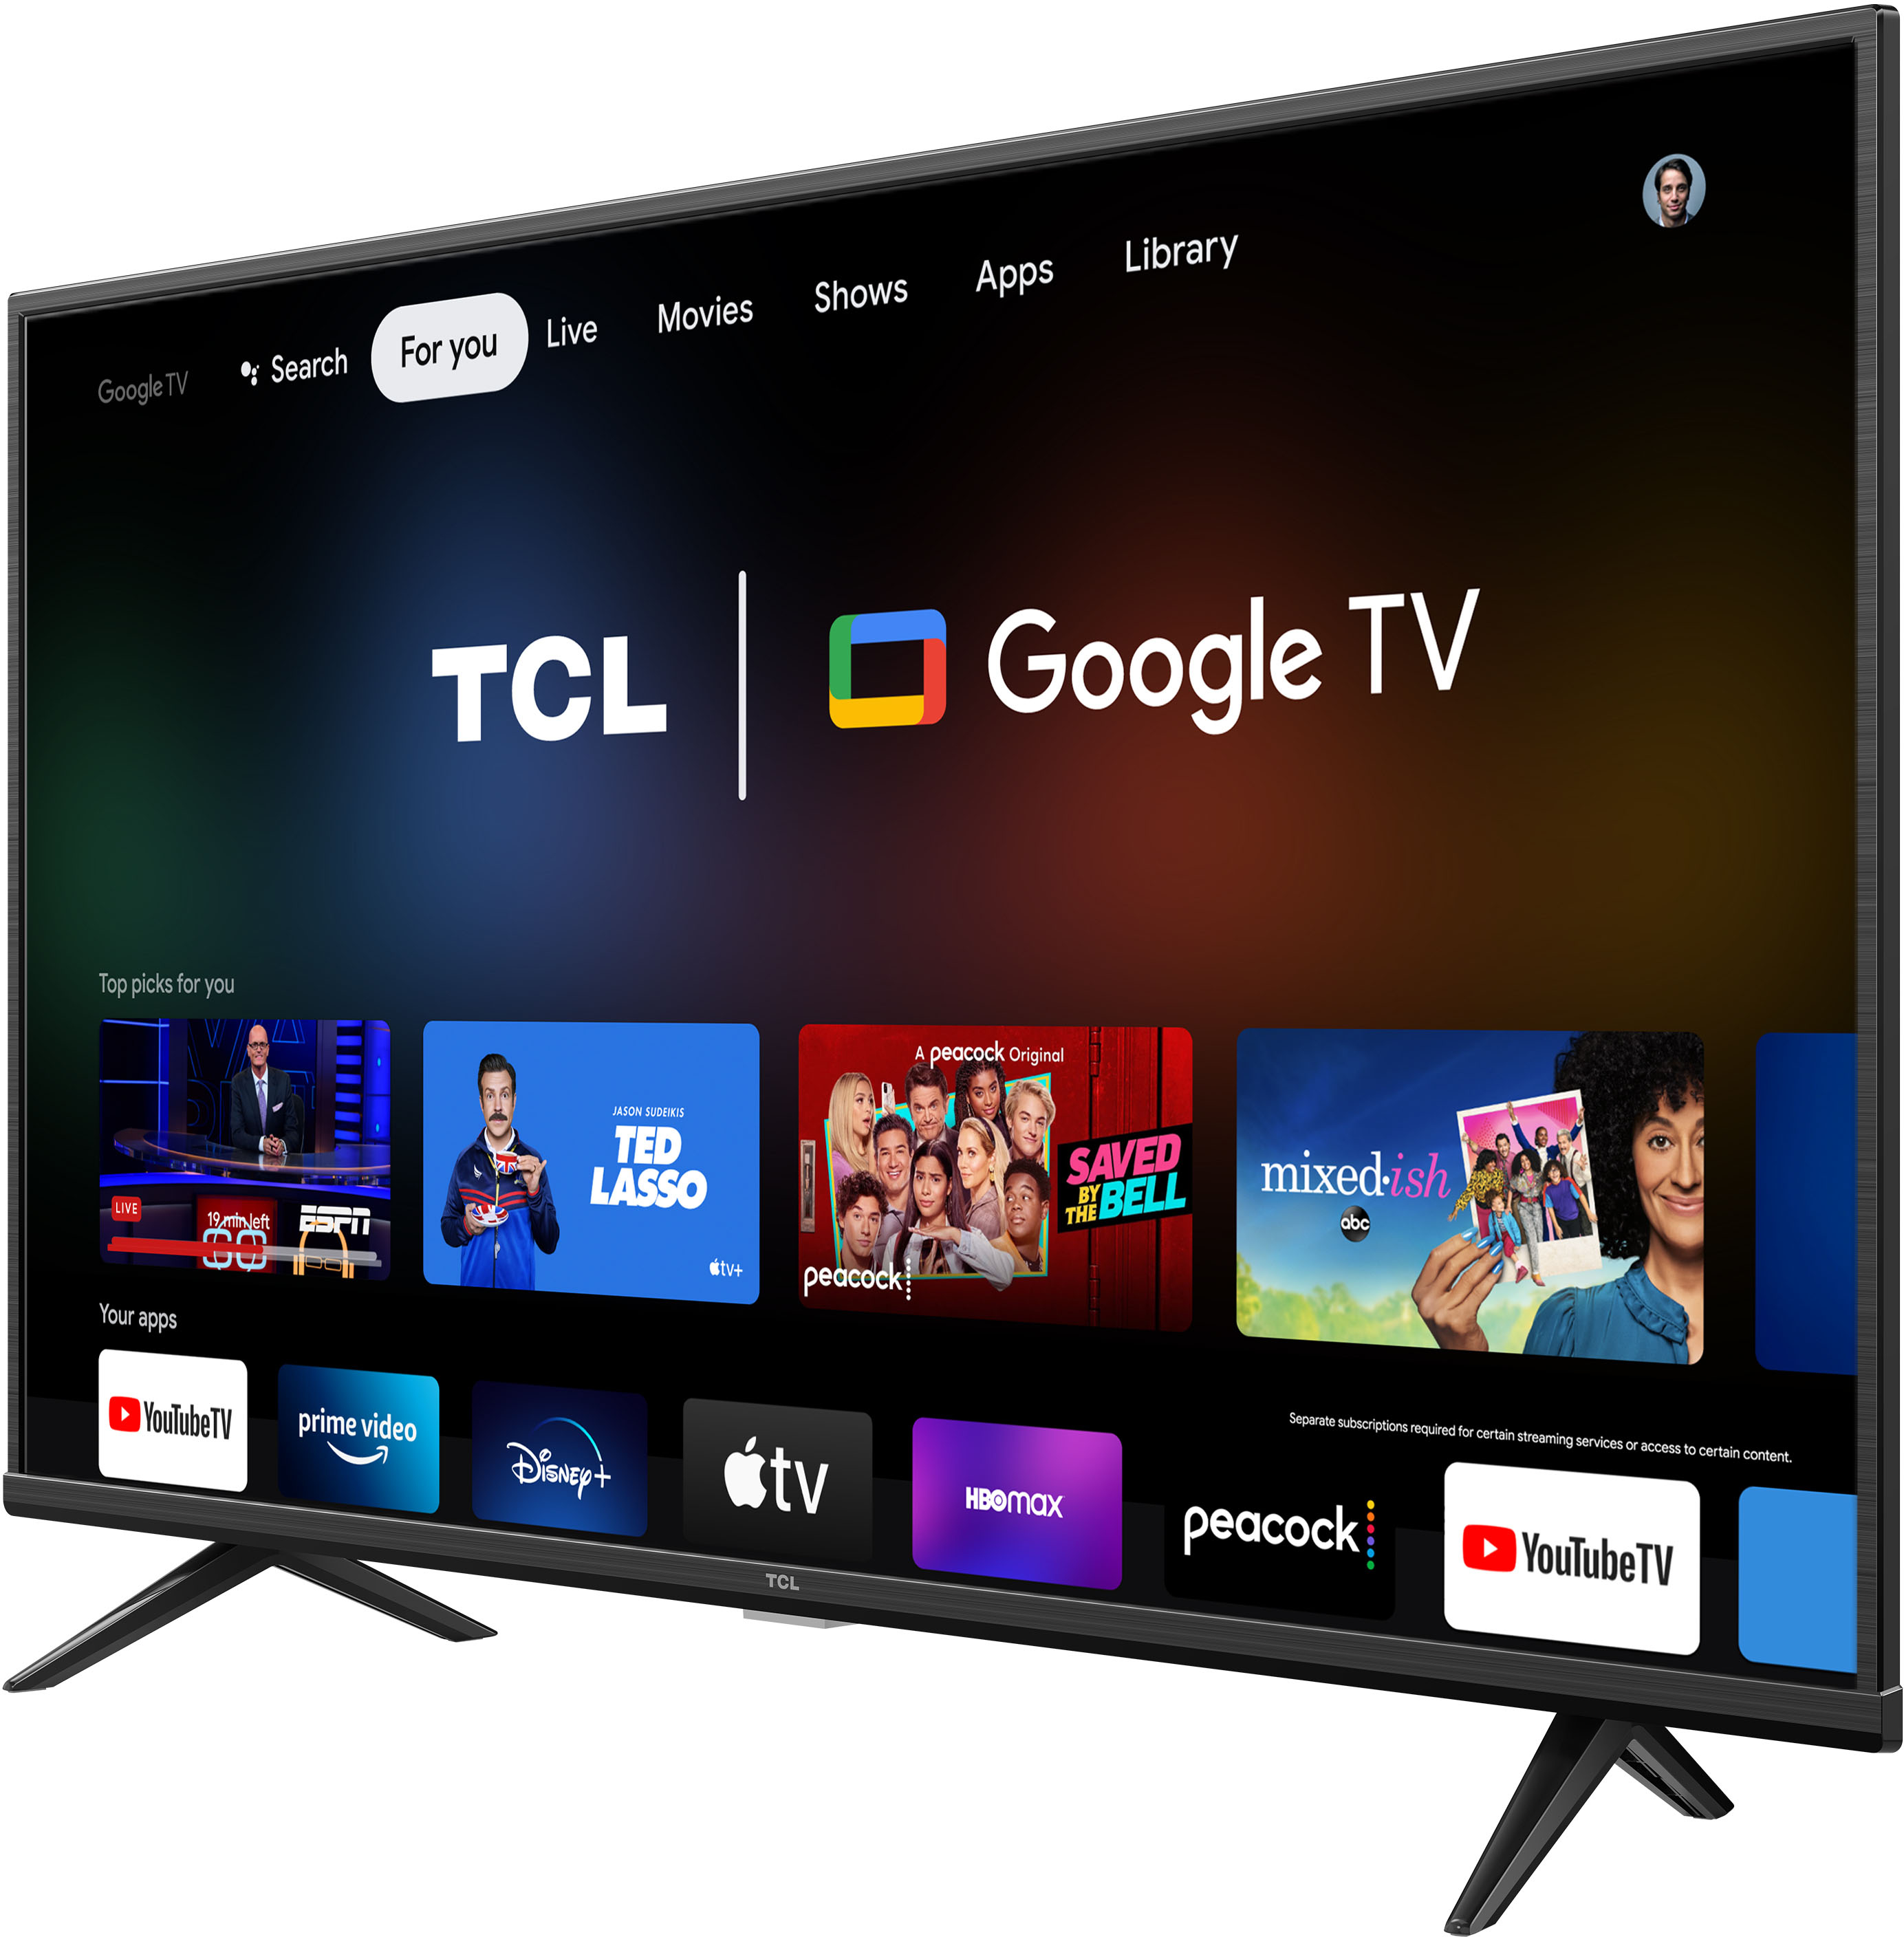 Passed specification Coherent TCL 50" Class 4-Series LED 4K UHD Smart Google TV 50S446 - Best Buy